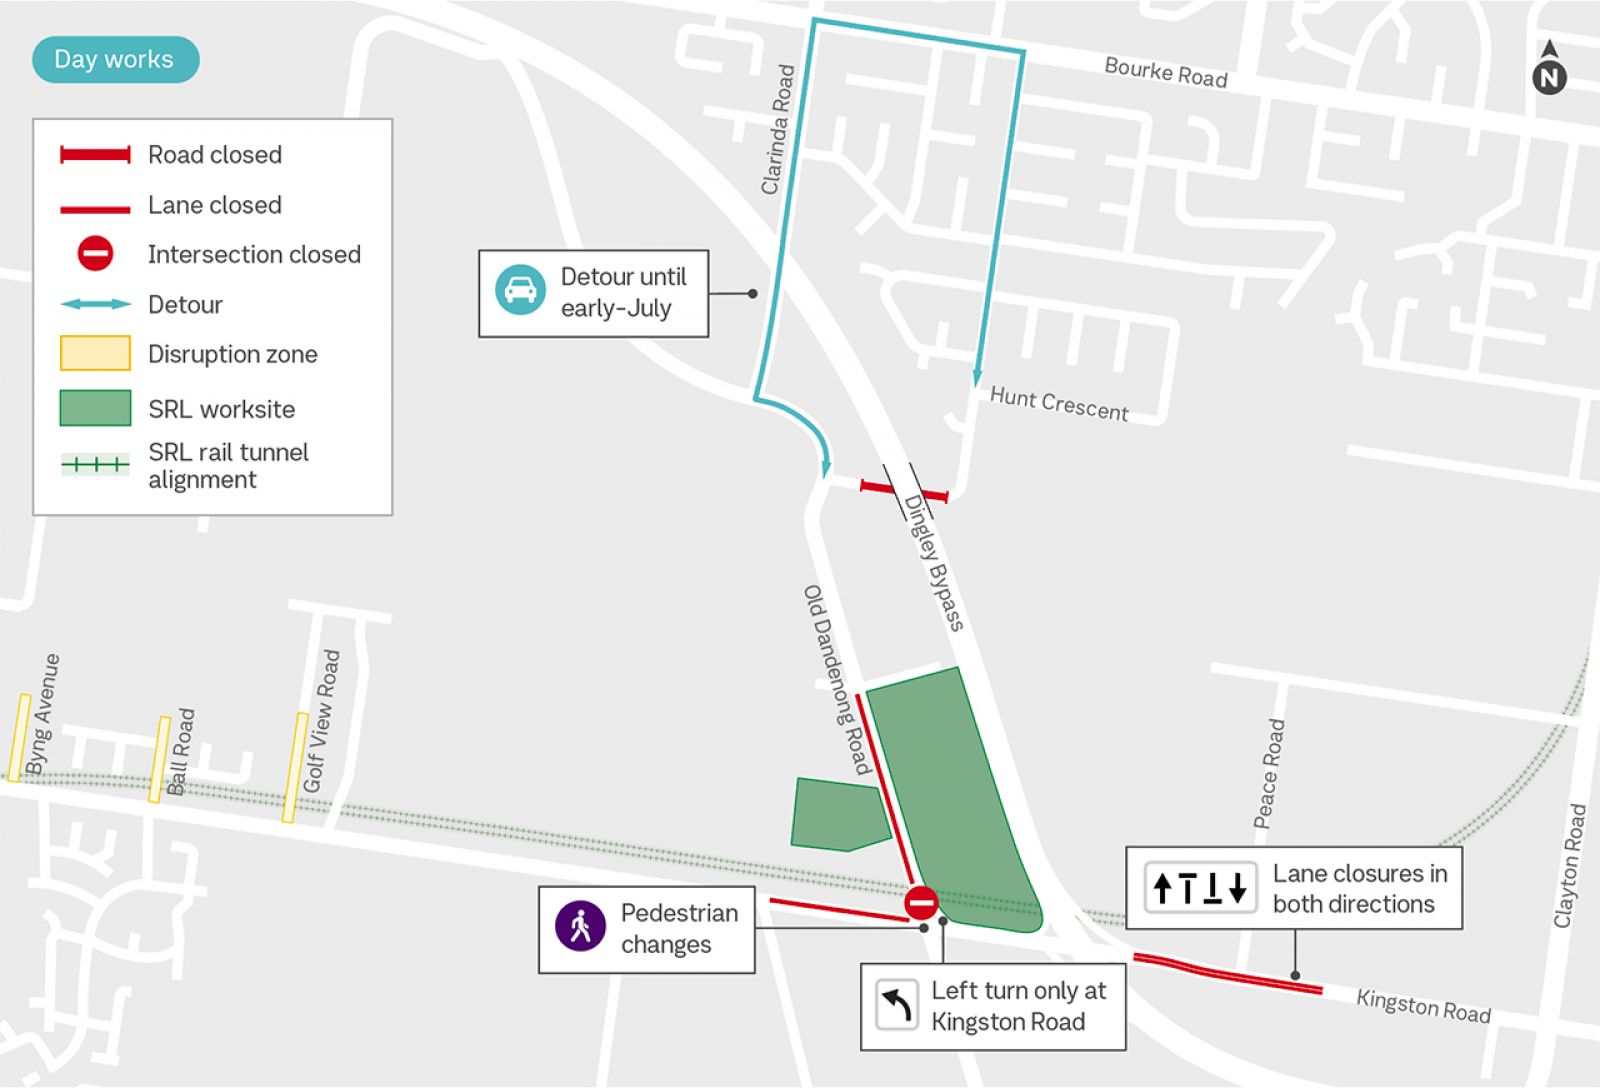 Disruption map for Heatherton, see below for more details.